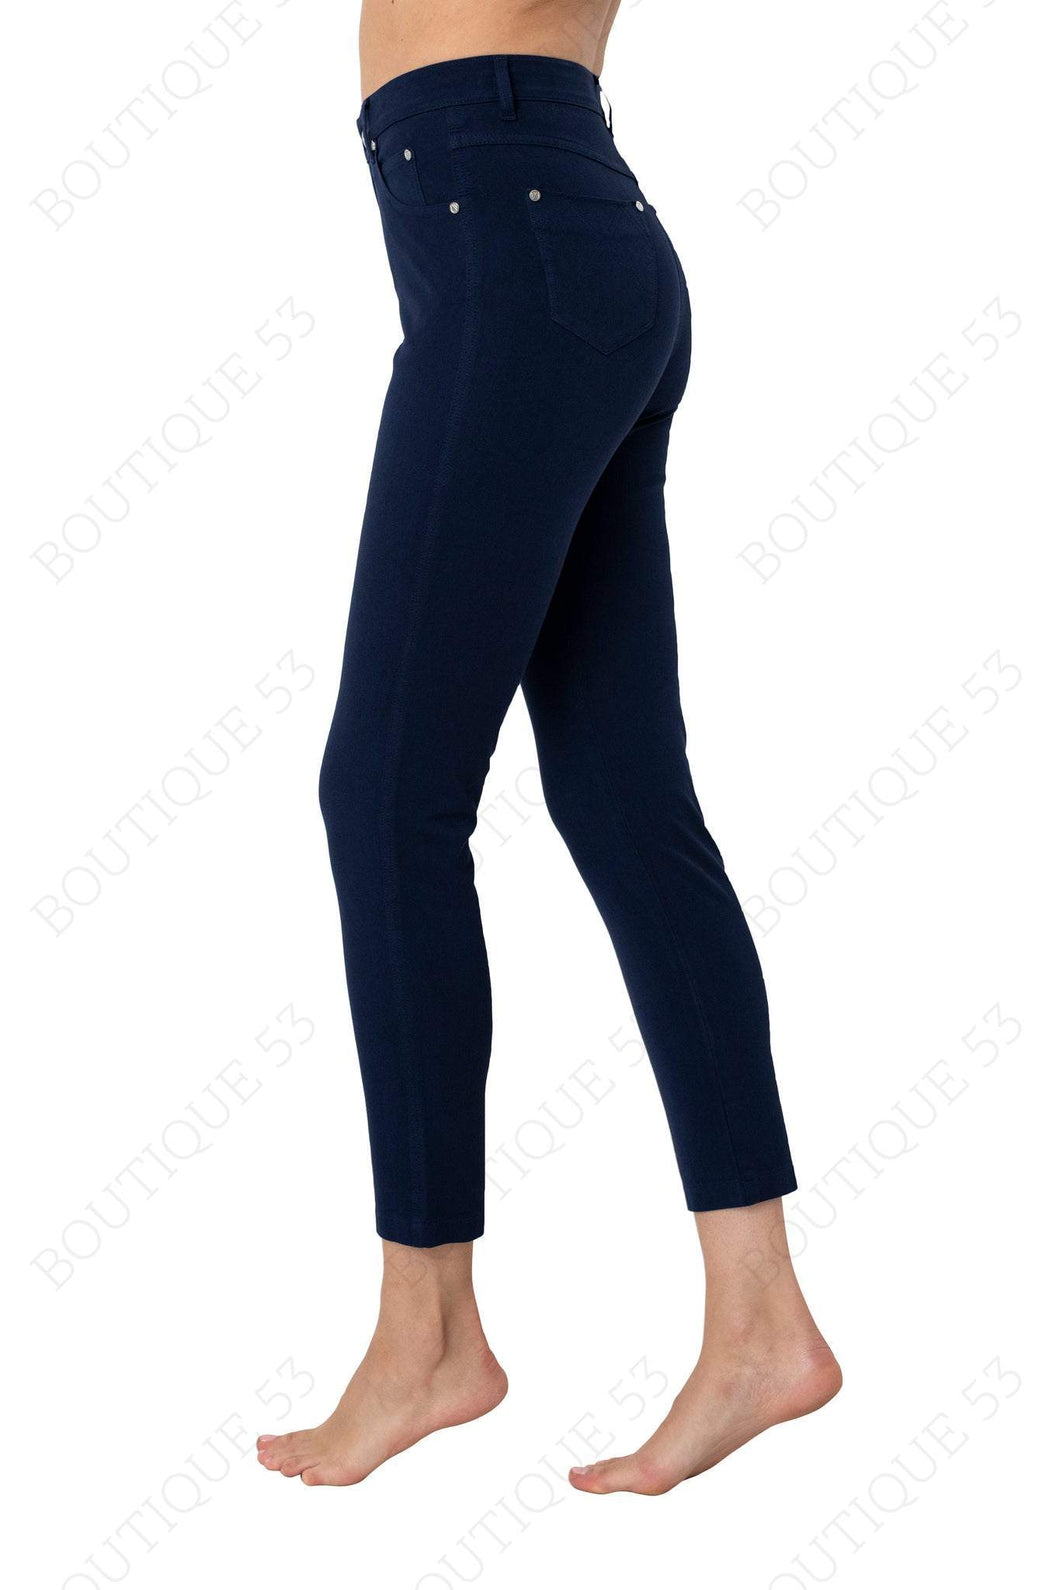 MARBLE FASHIONS 2400 JEANS COLOUR 103 - NAVY